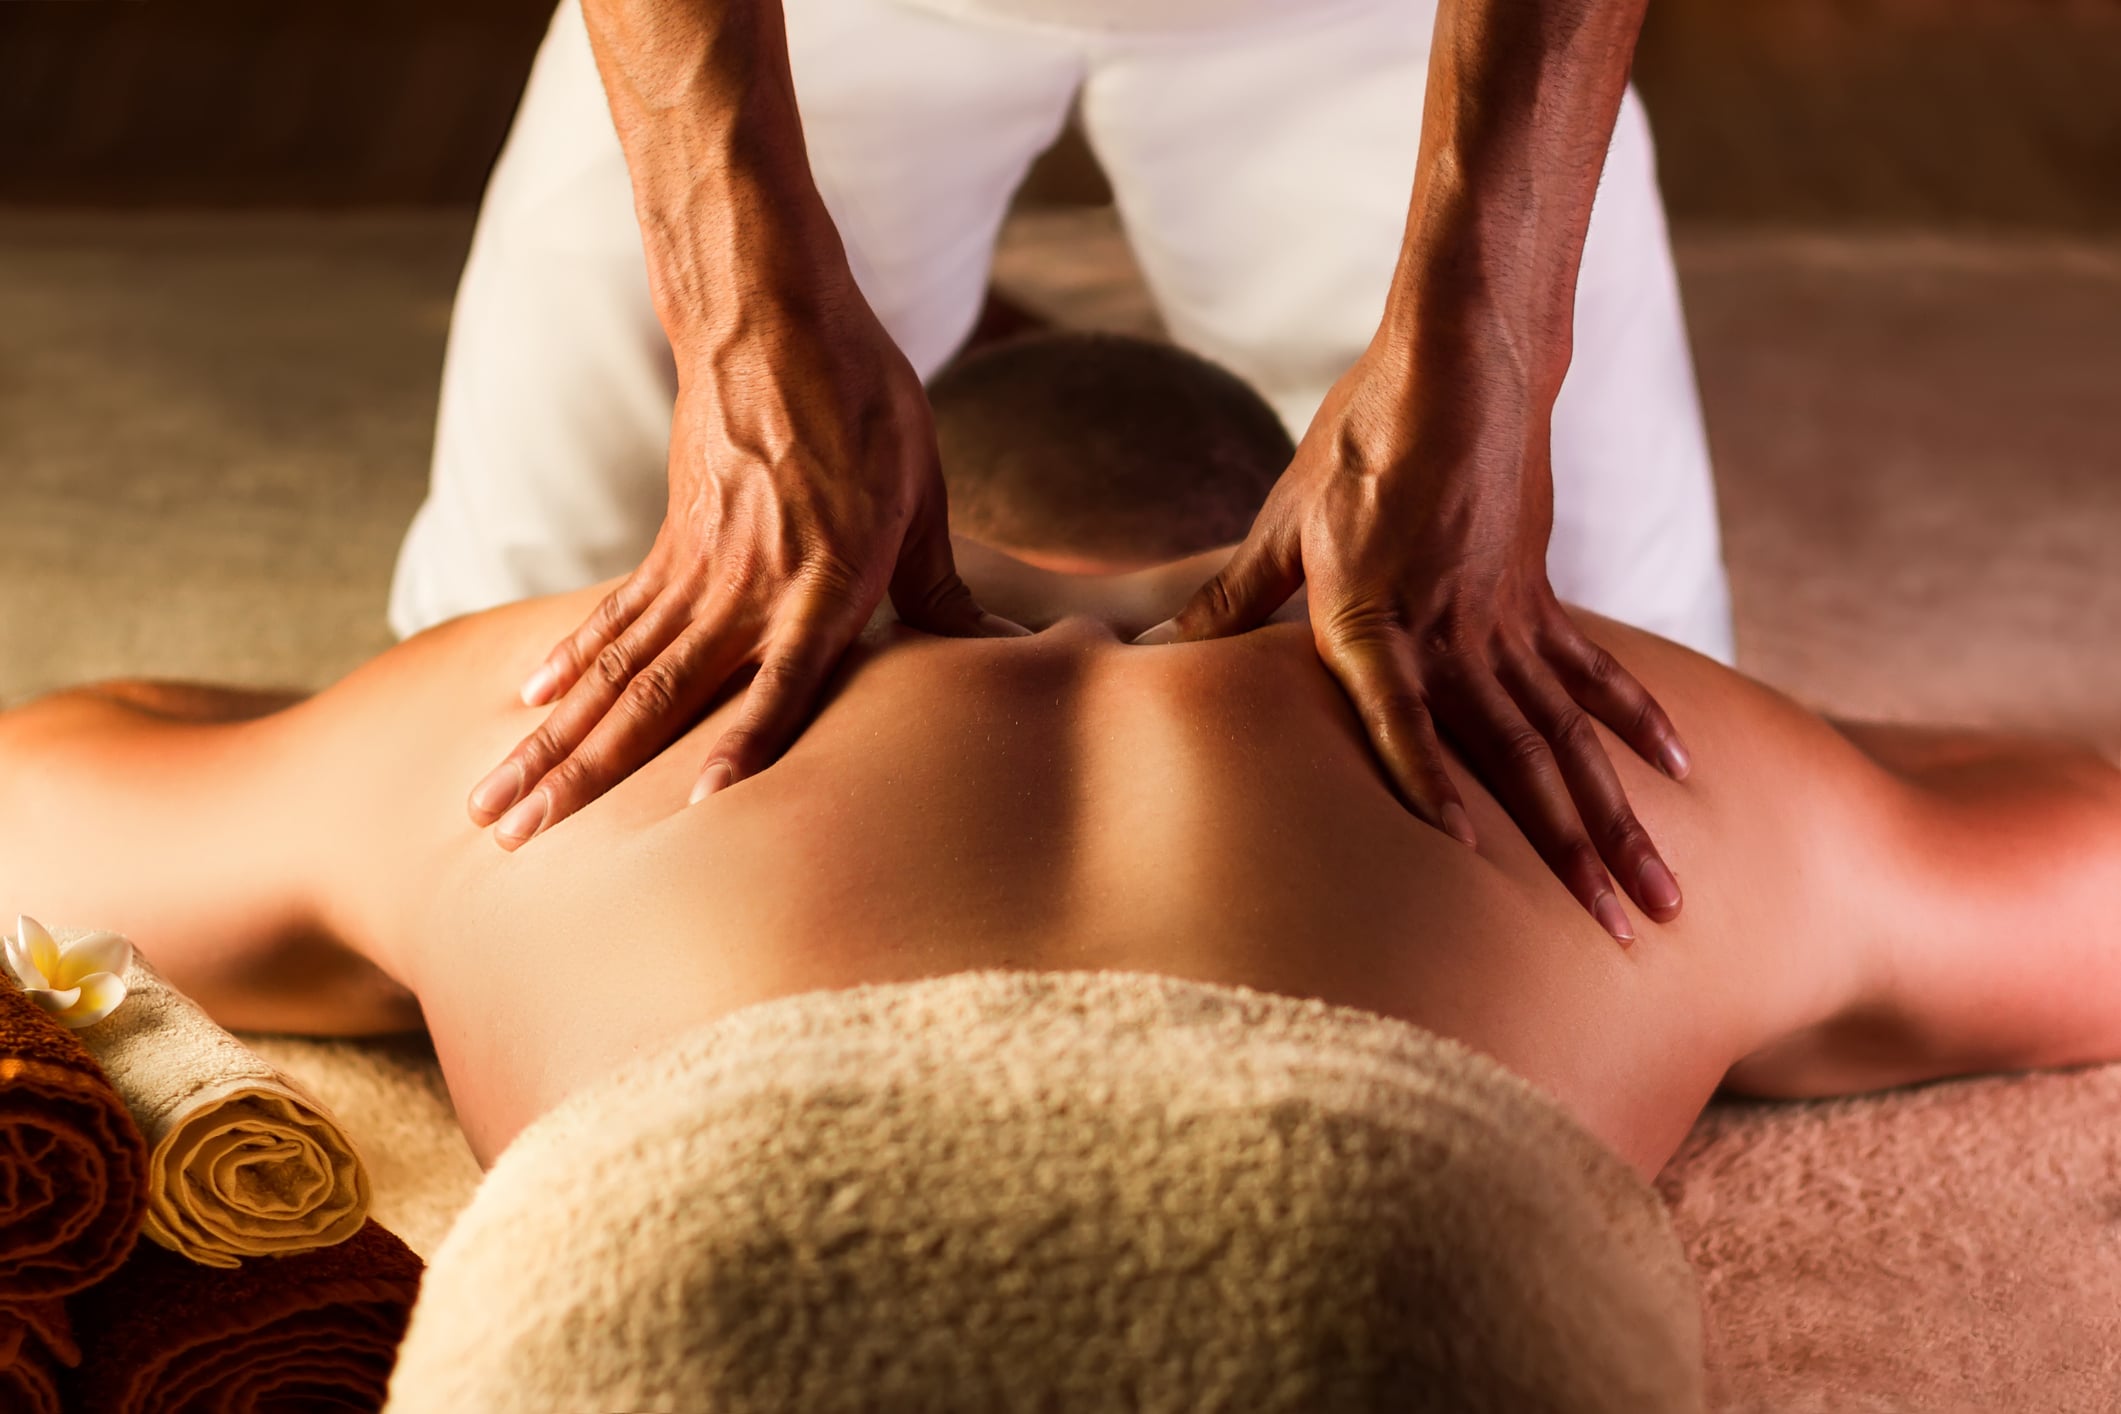 What to expect from a massage